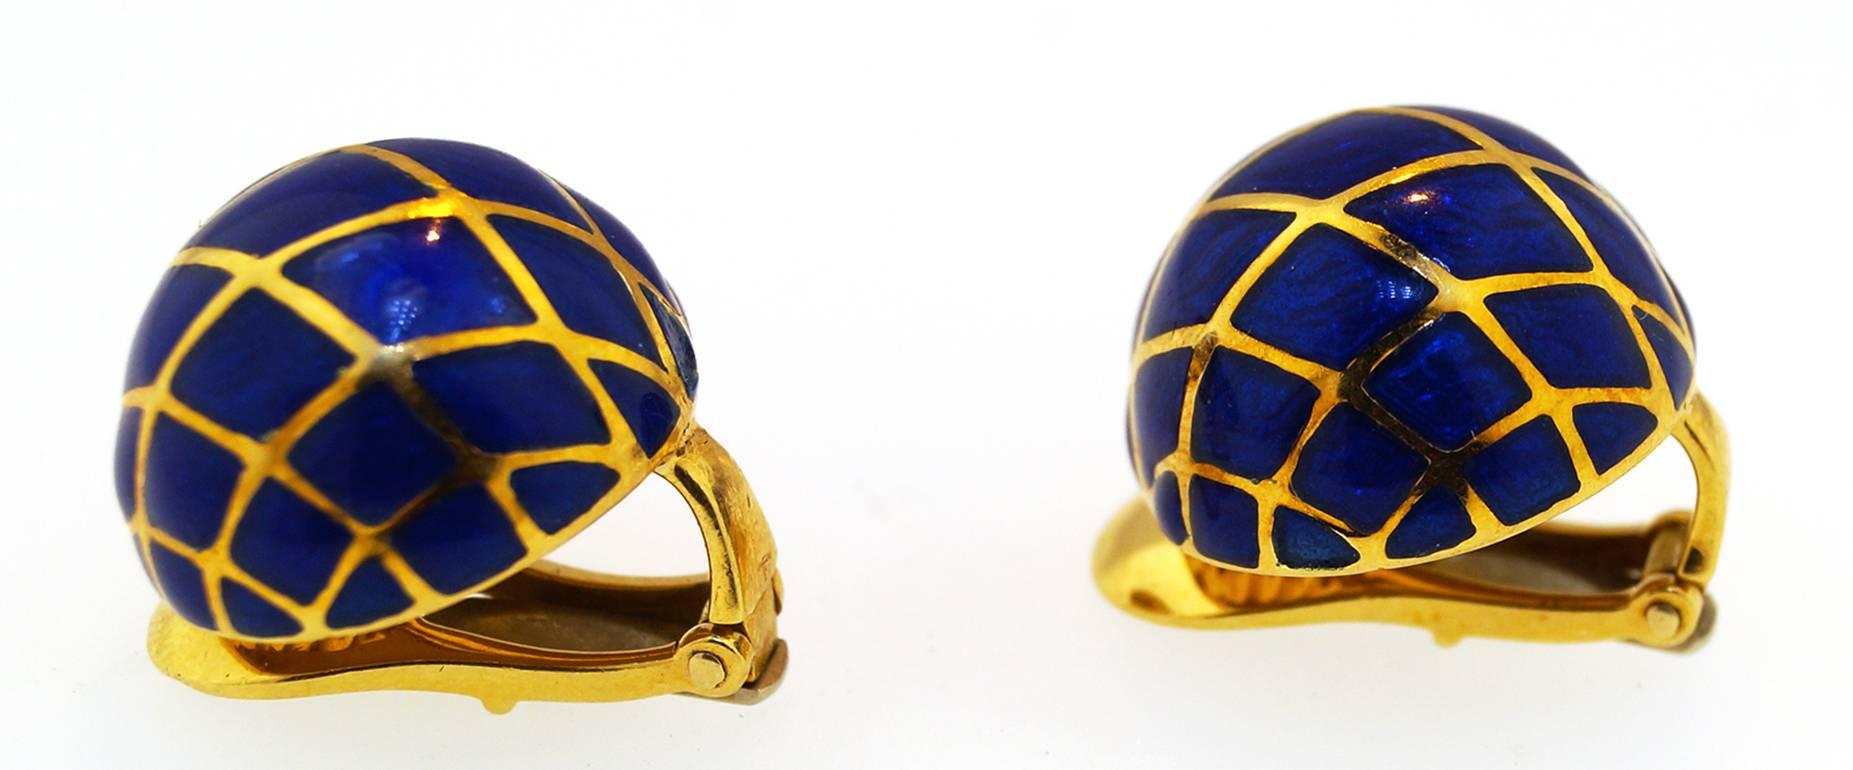 A playful creation courtesy of David Webb. Blue enamel framed by golden borders create a harlequin pattern that will delight enthusiasts for this iconic designer. 